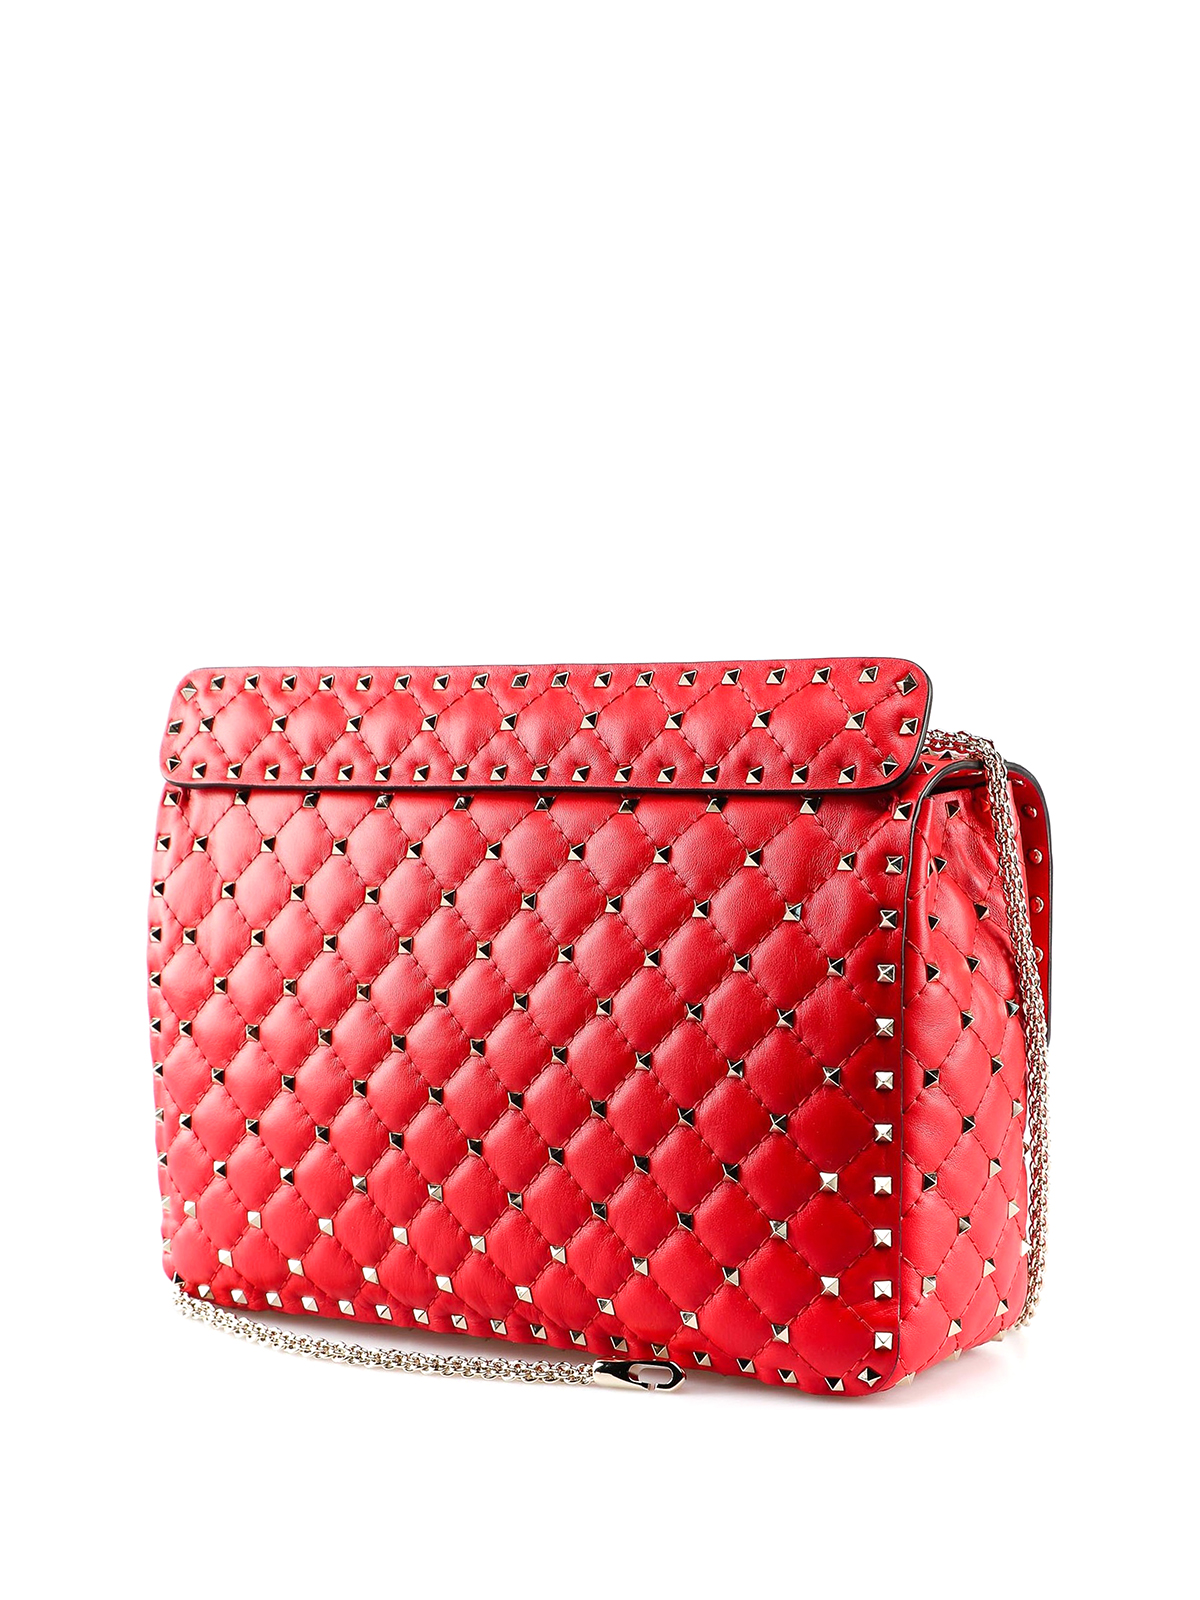 VALENTINO, 'Rockstud Spike' small quilted leather shoulder bag, RED, Women